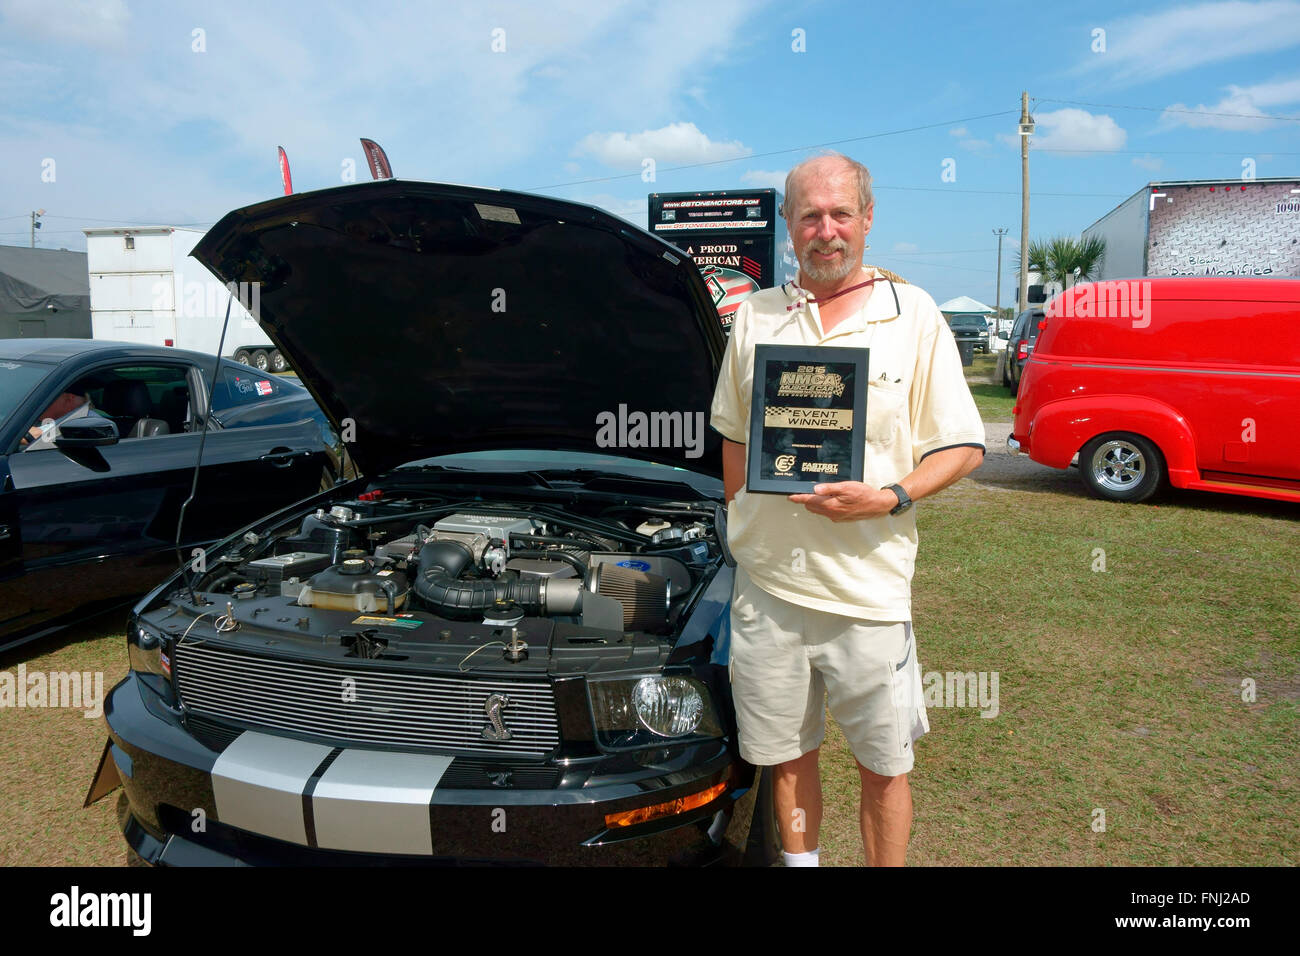 A man at a car show that has won first place and is holding his trophy plaque next to his car Stock Photo